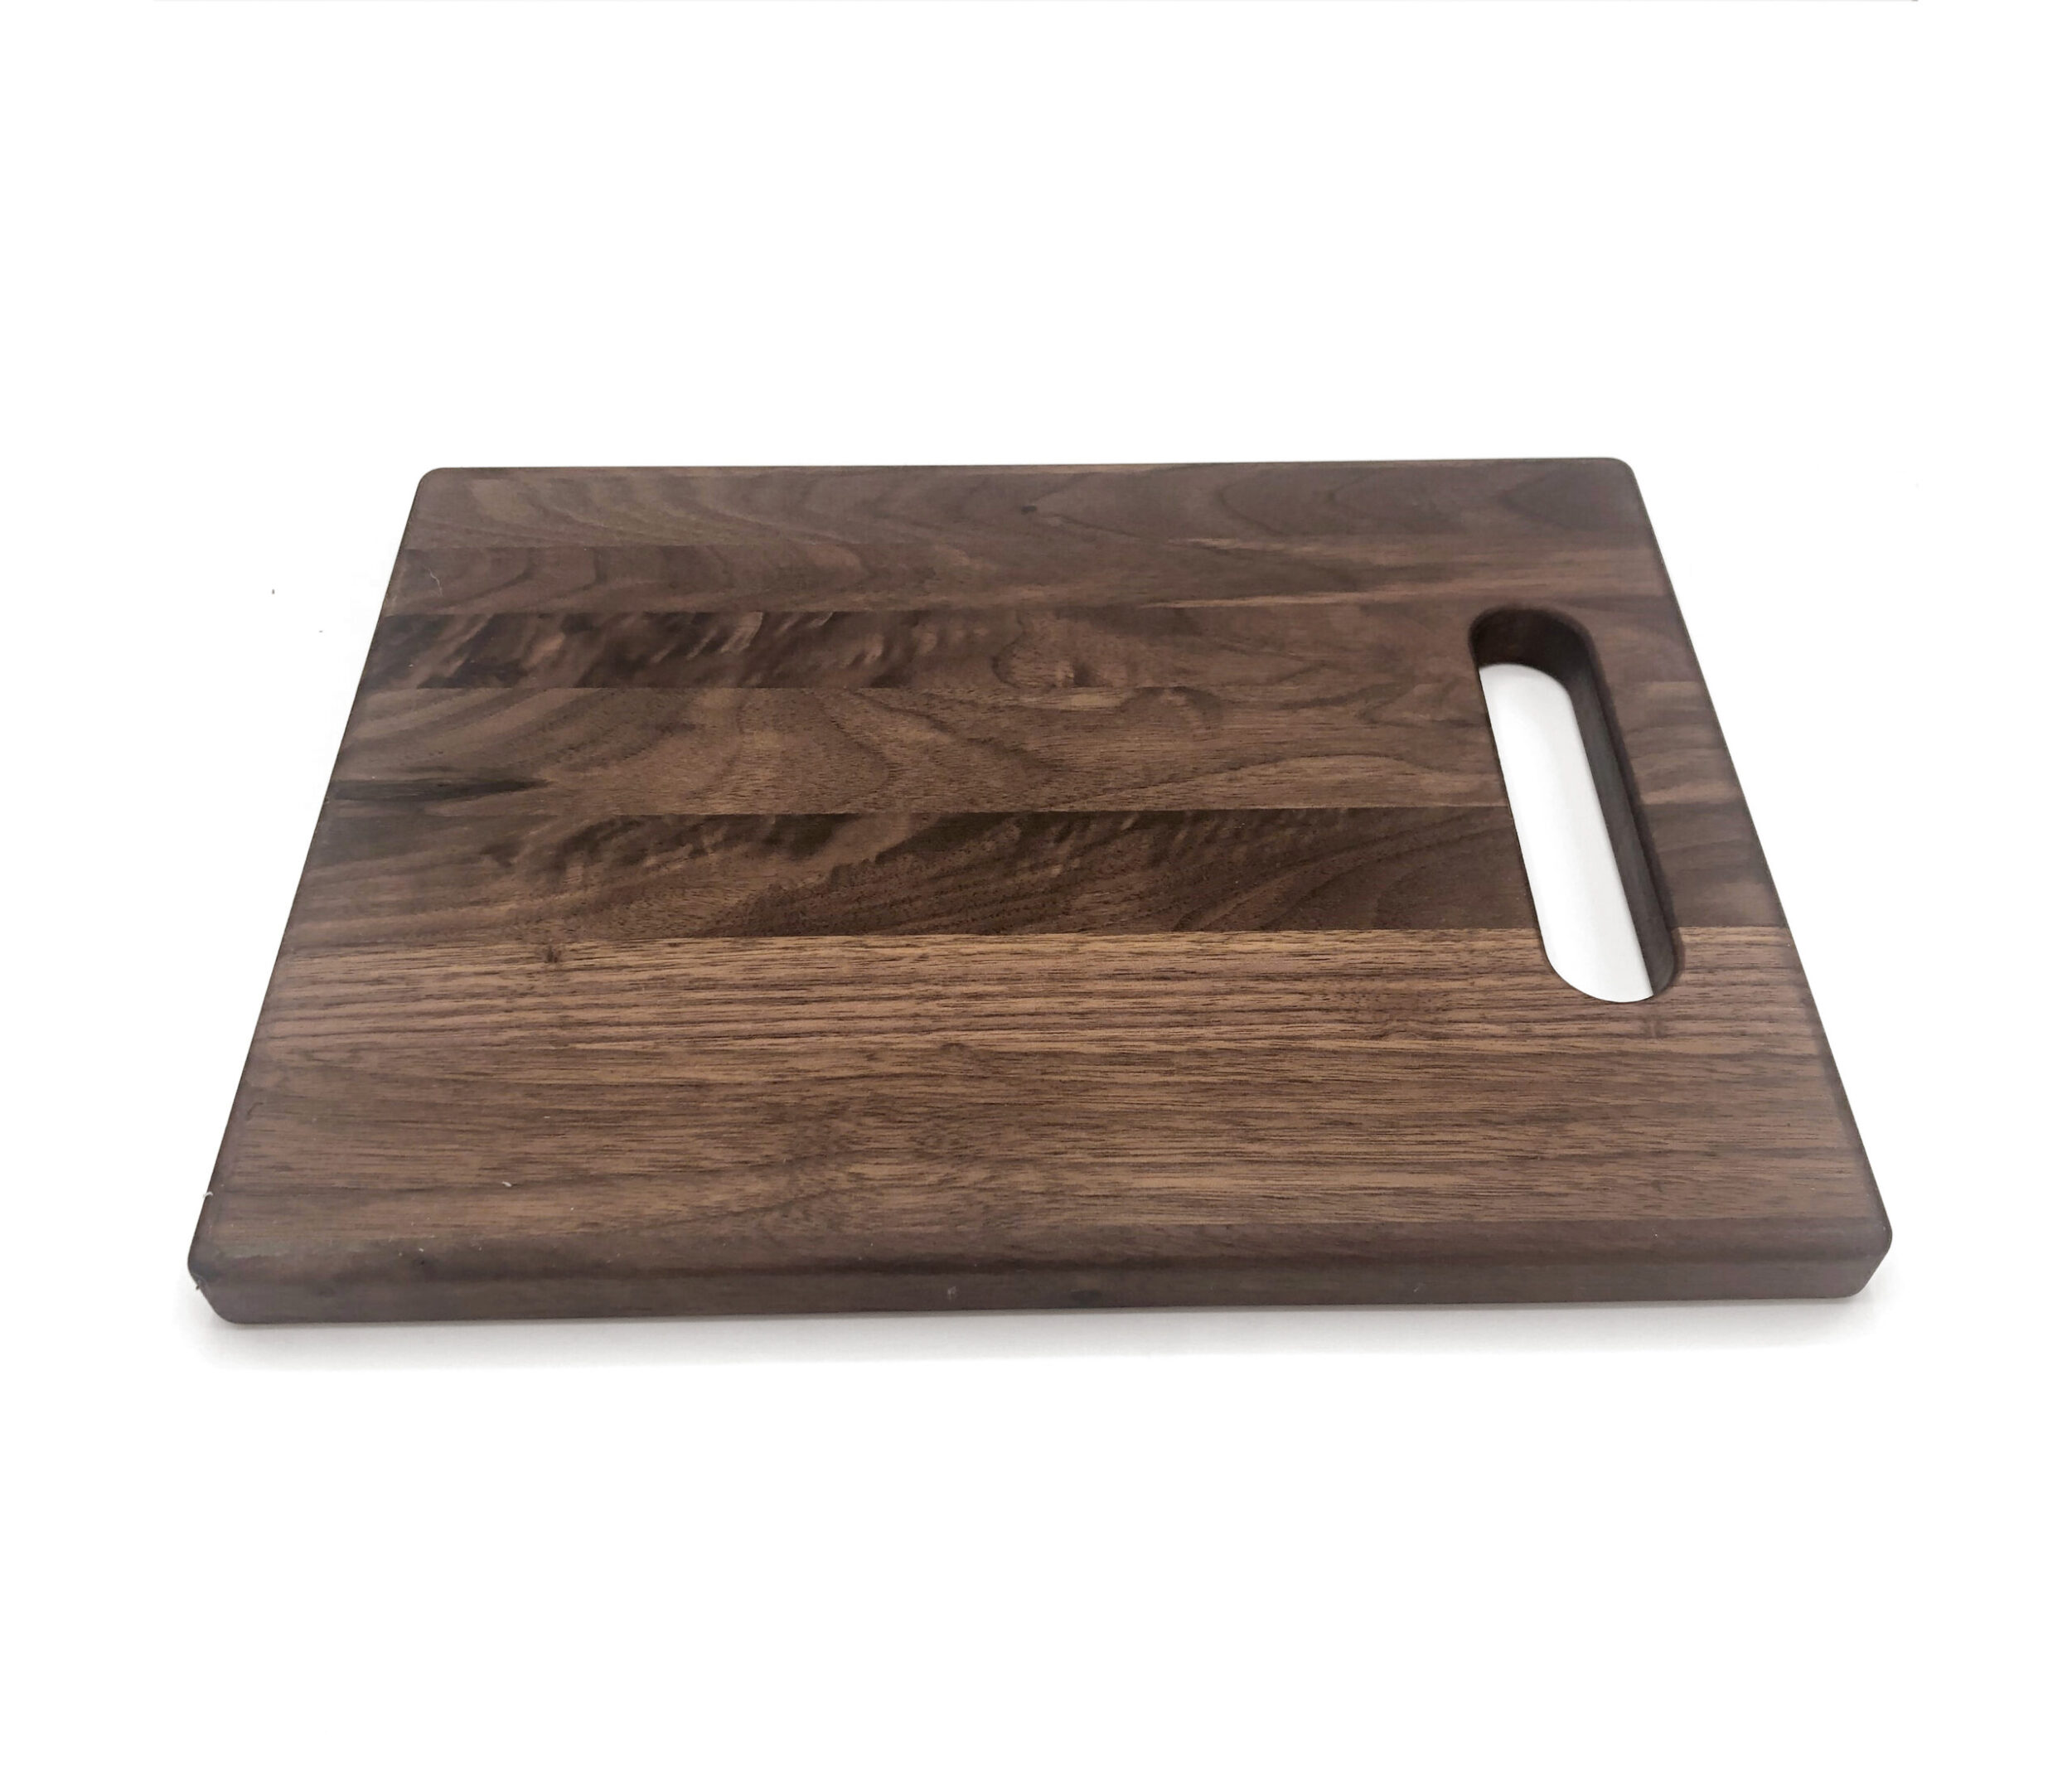 Wooden Offcuts cutting board, 30 x 21 cm, oiled pine